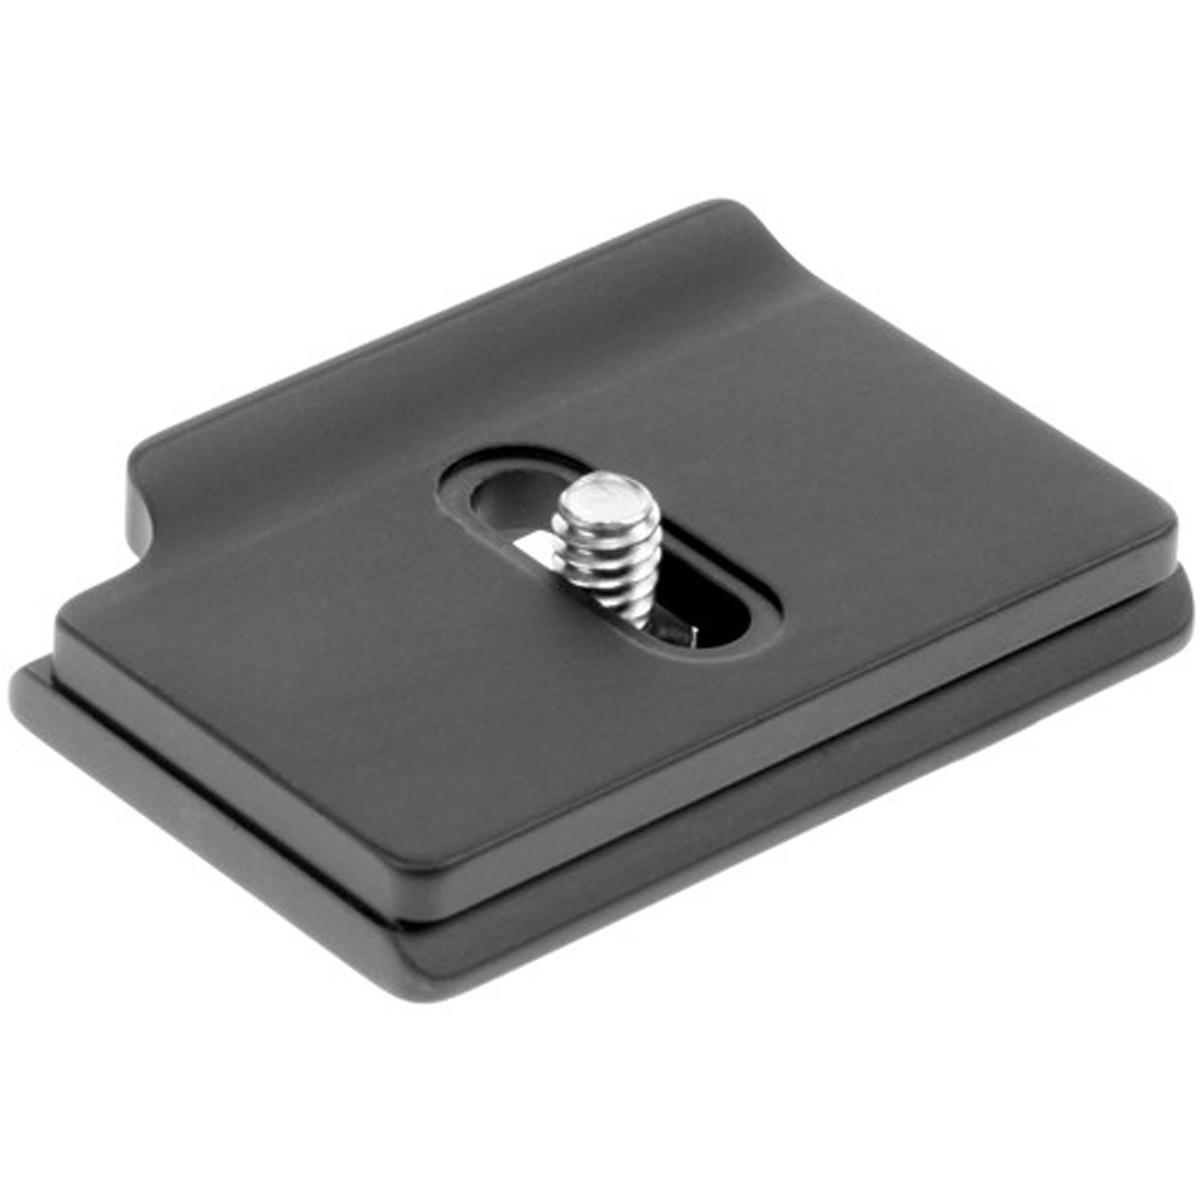 Image of Acratech 2166 Quick Release Plate for Canon 50D / 40D